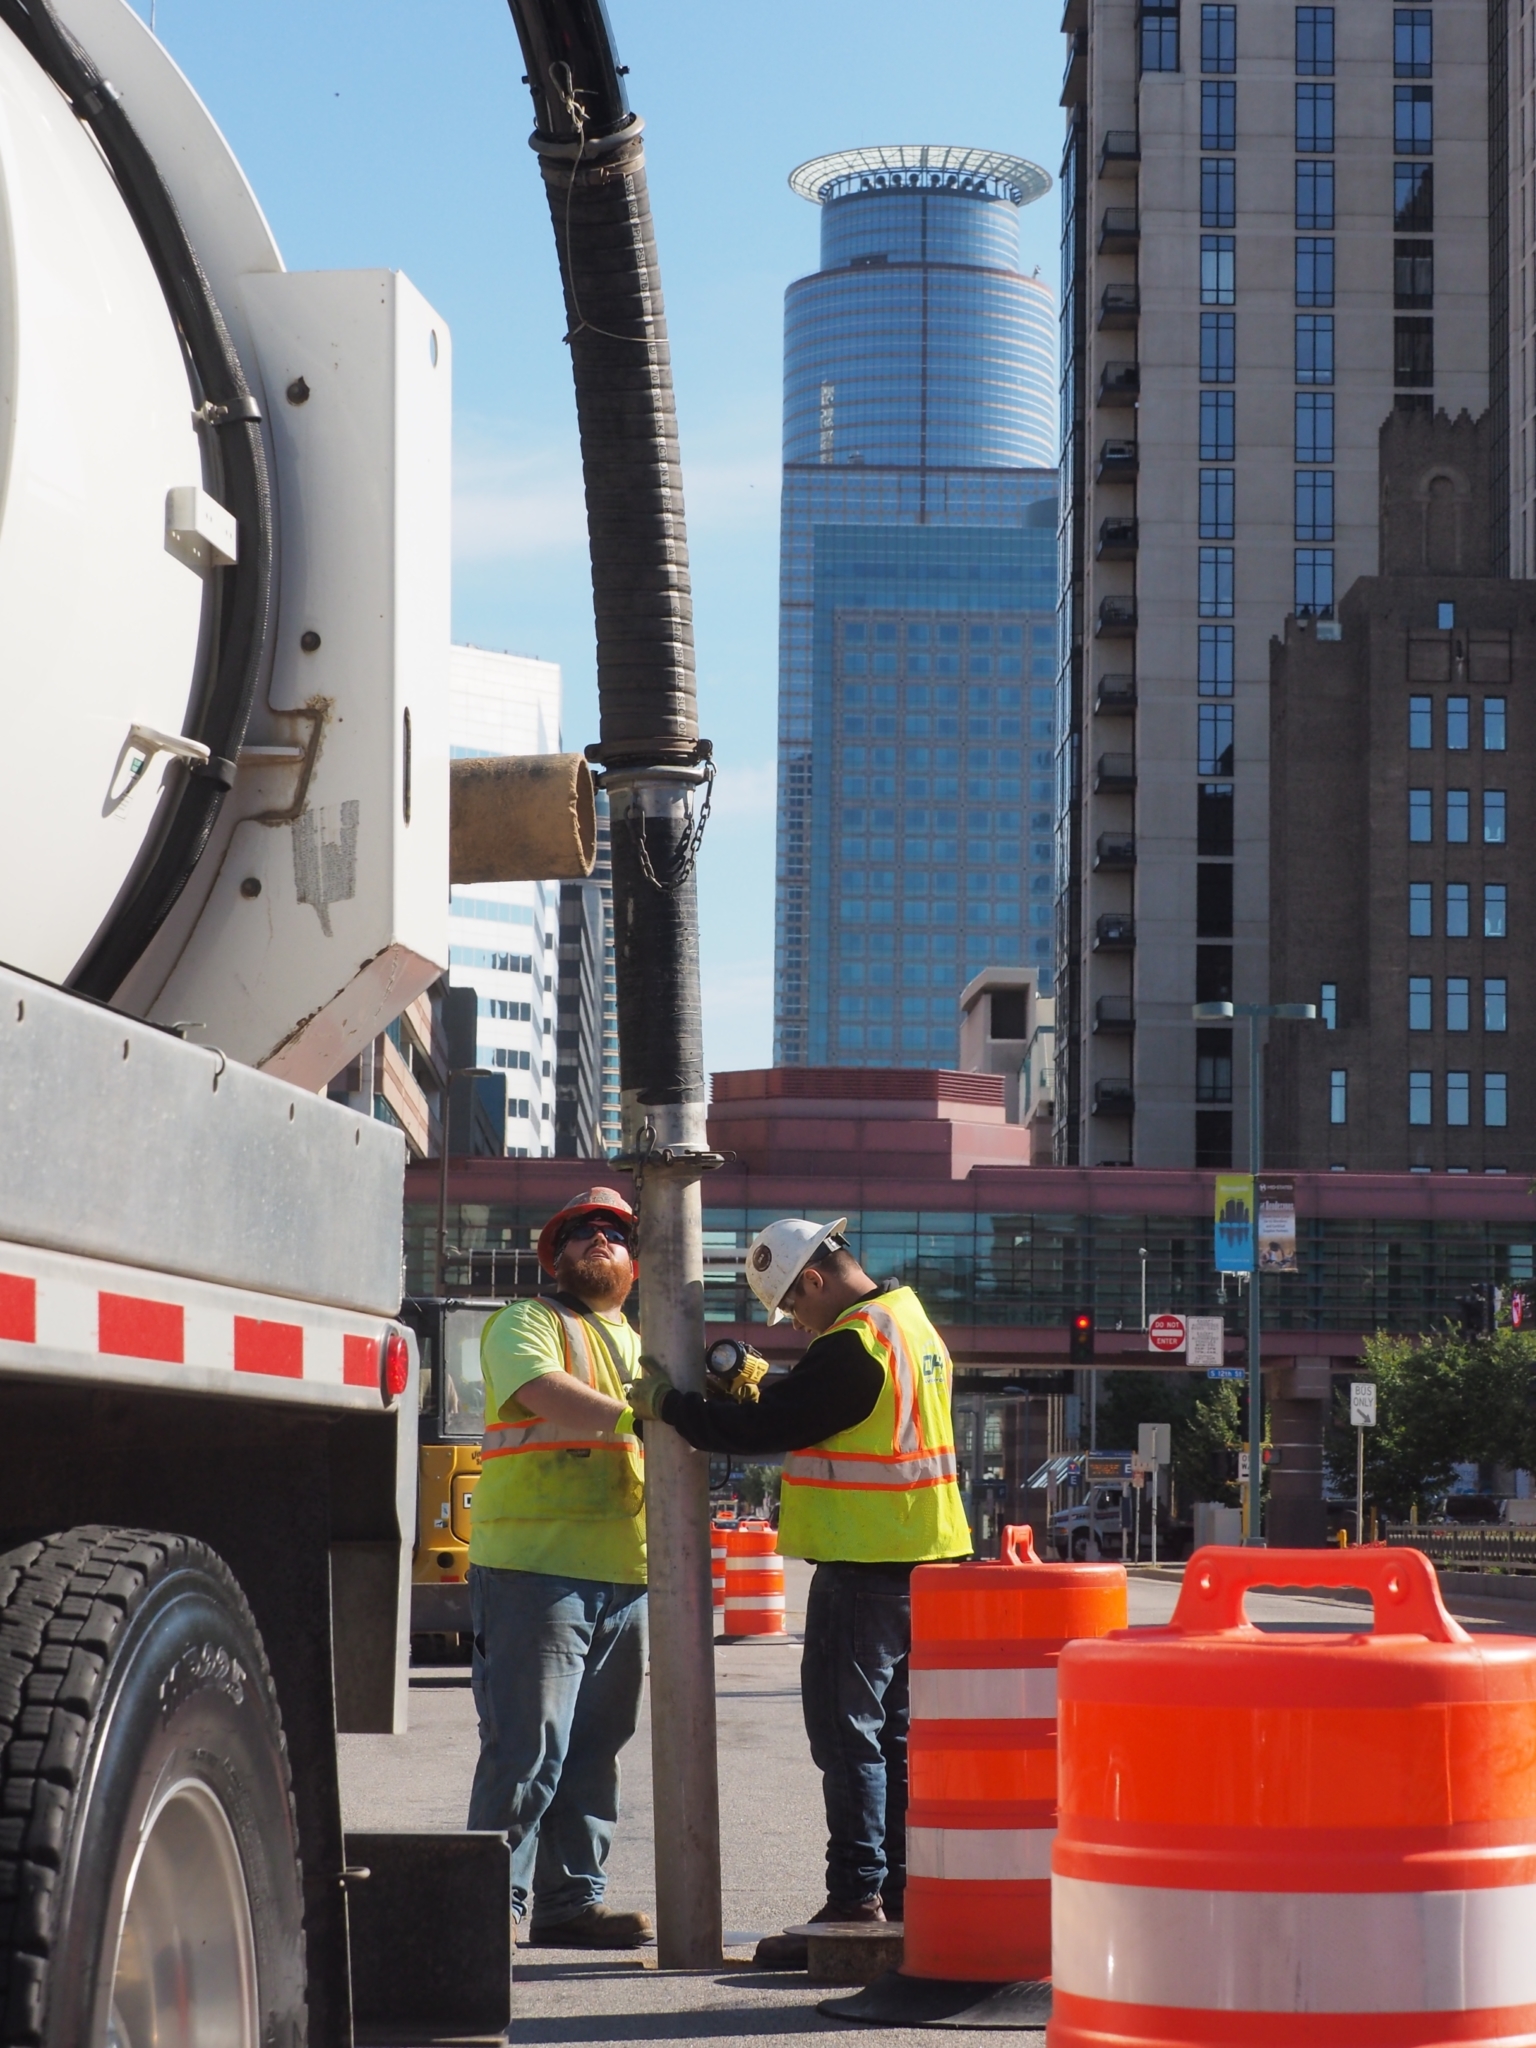 John Shuneman and Jason Bauer of Davids Hydro Vac, featured in the November issue, excavate to locate underground utilities in downtown Minneapolis.